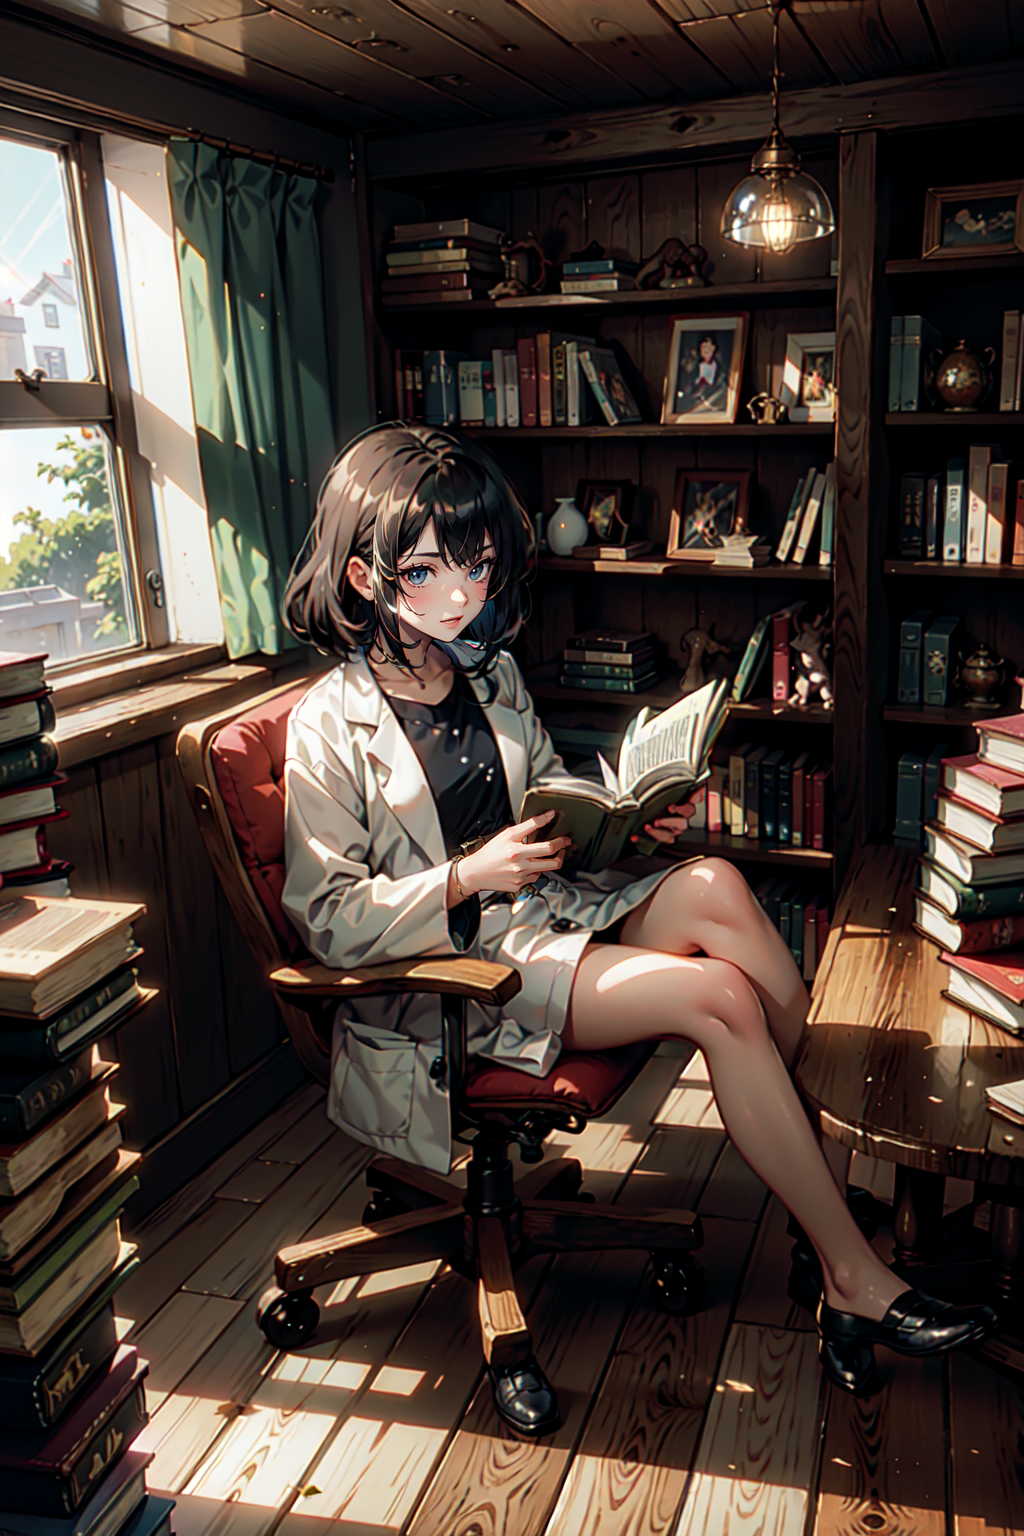 Download wallpaper 950x1534 reading book, anime girl, lazy, iphone,  950x1534 hd background, 3049